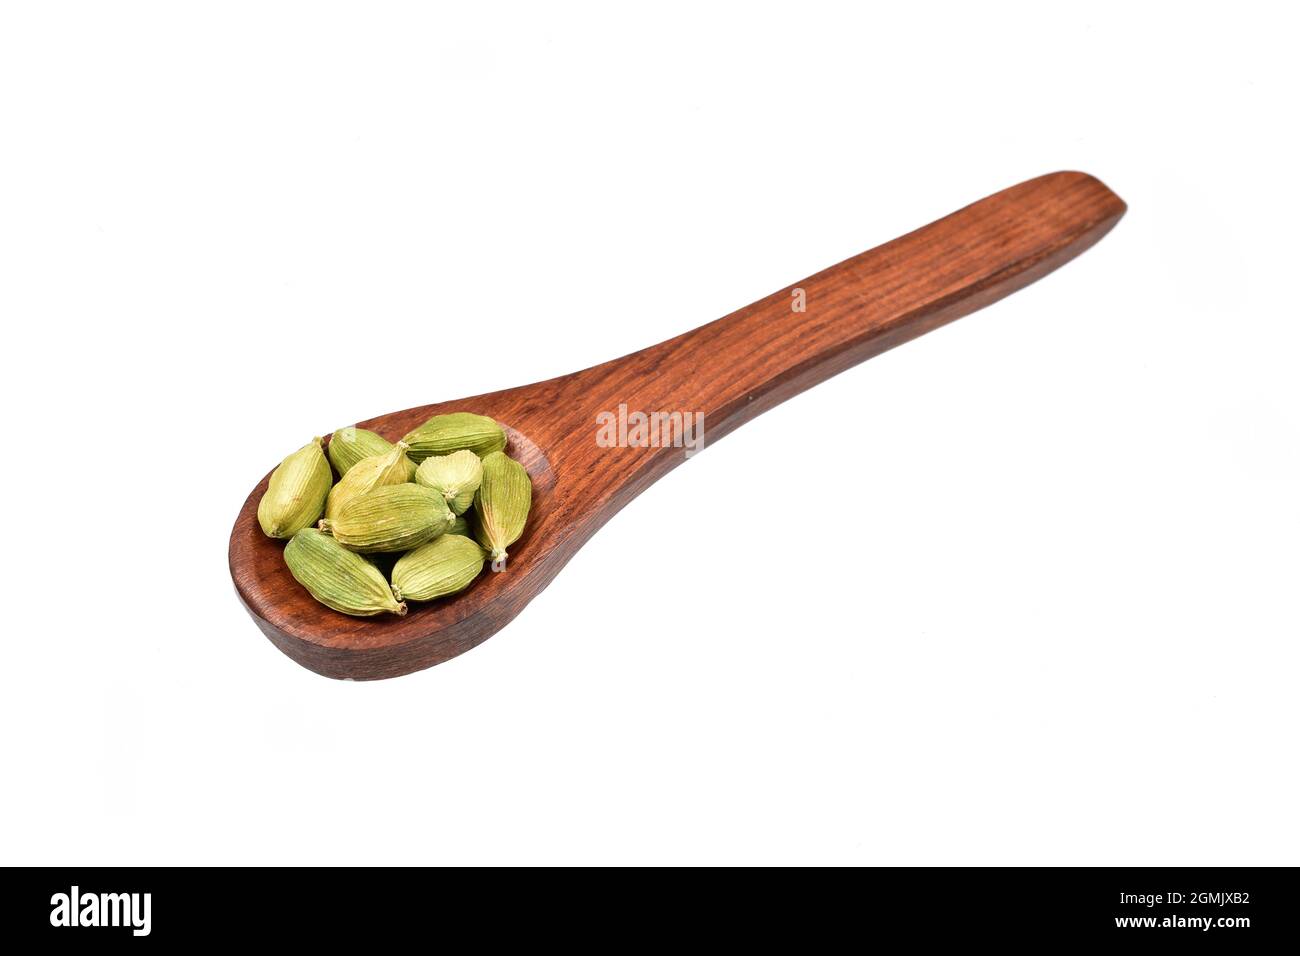 Cardamom in Wooden Spoon Isolated on White Background with Clipping Path Stock Photo